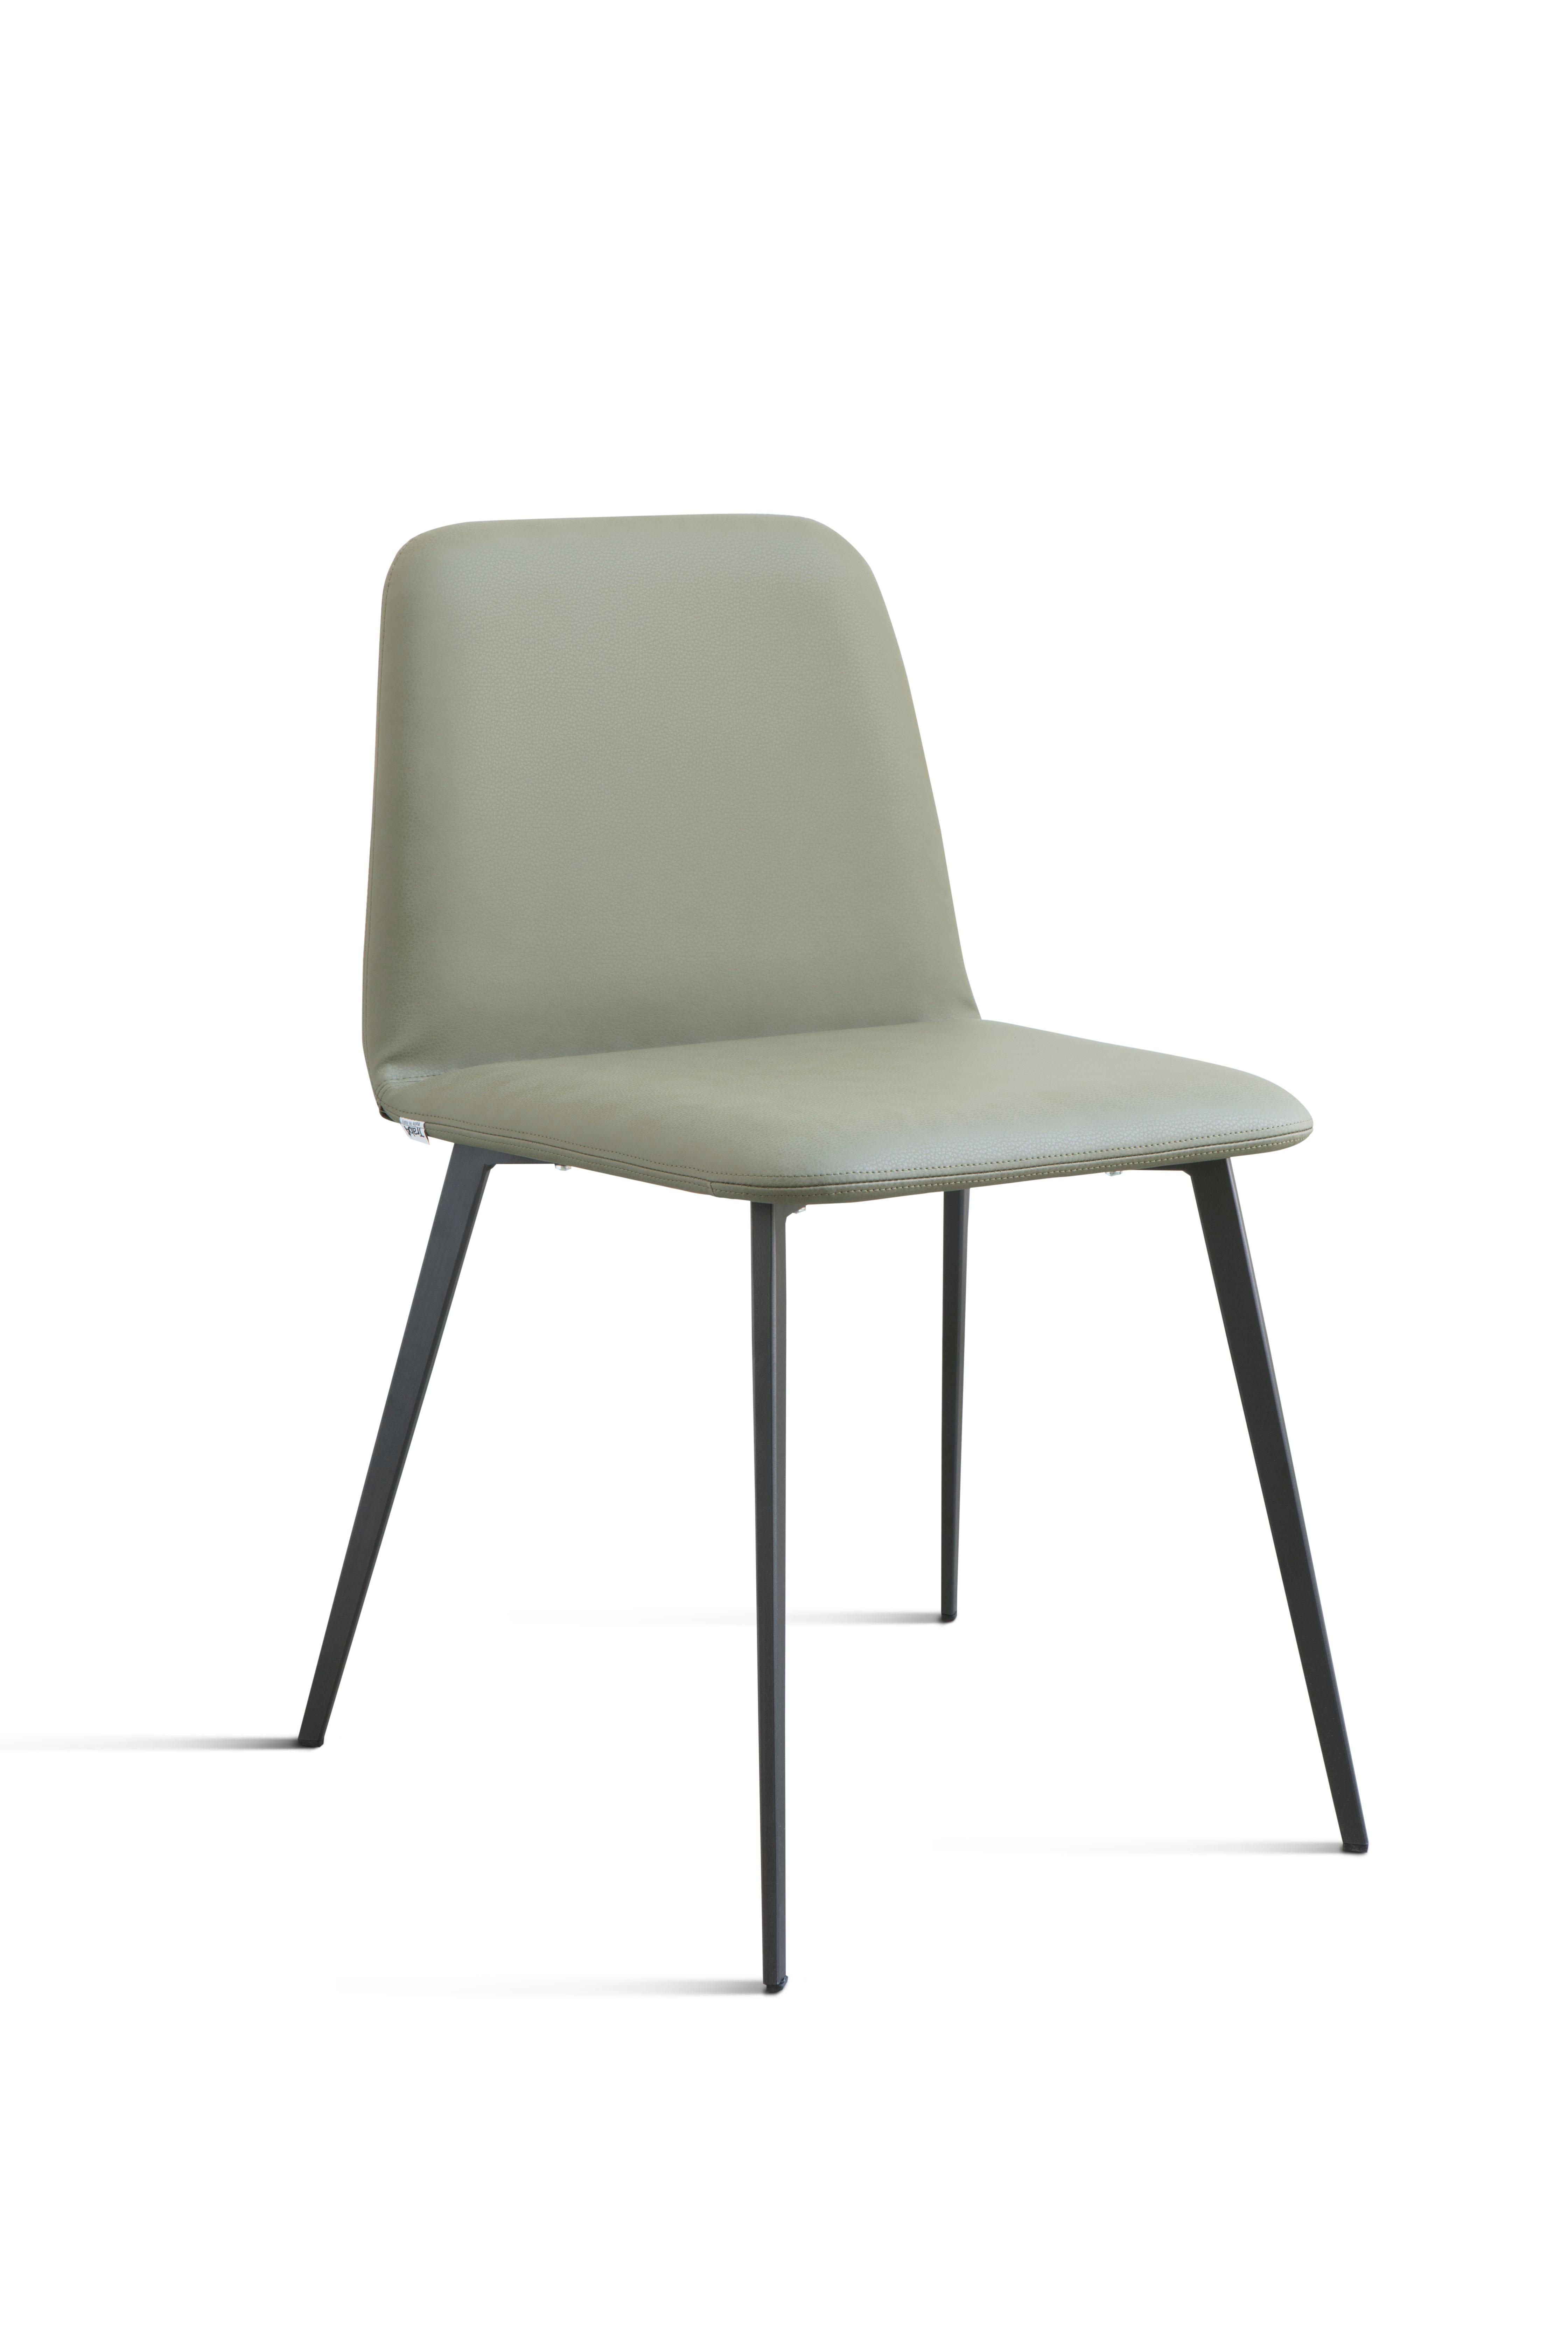 Bardot Met stands out for its elegance and brightness, extending its style to include new frames, pastel and vibrant shades, and refined, contemporary finishes. The frame of the new chair and stool is lighter, through the use of clean-lined, metal